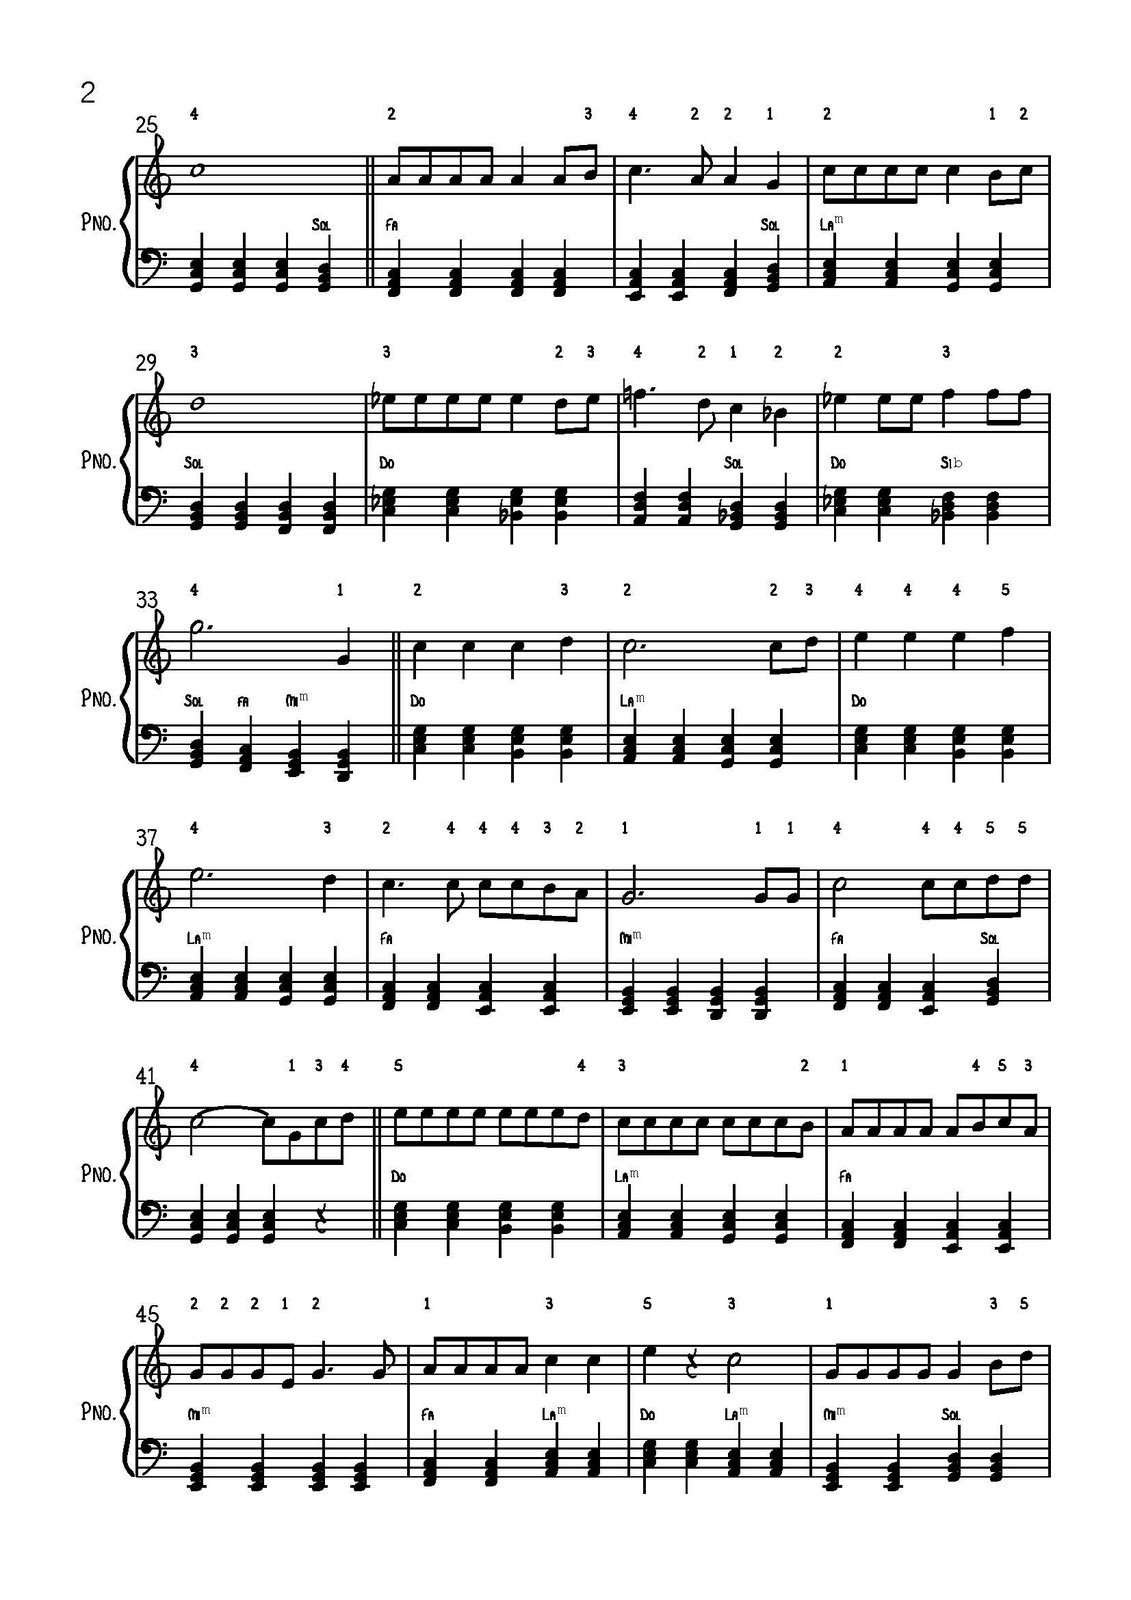 Partition piano 3 notes